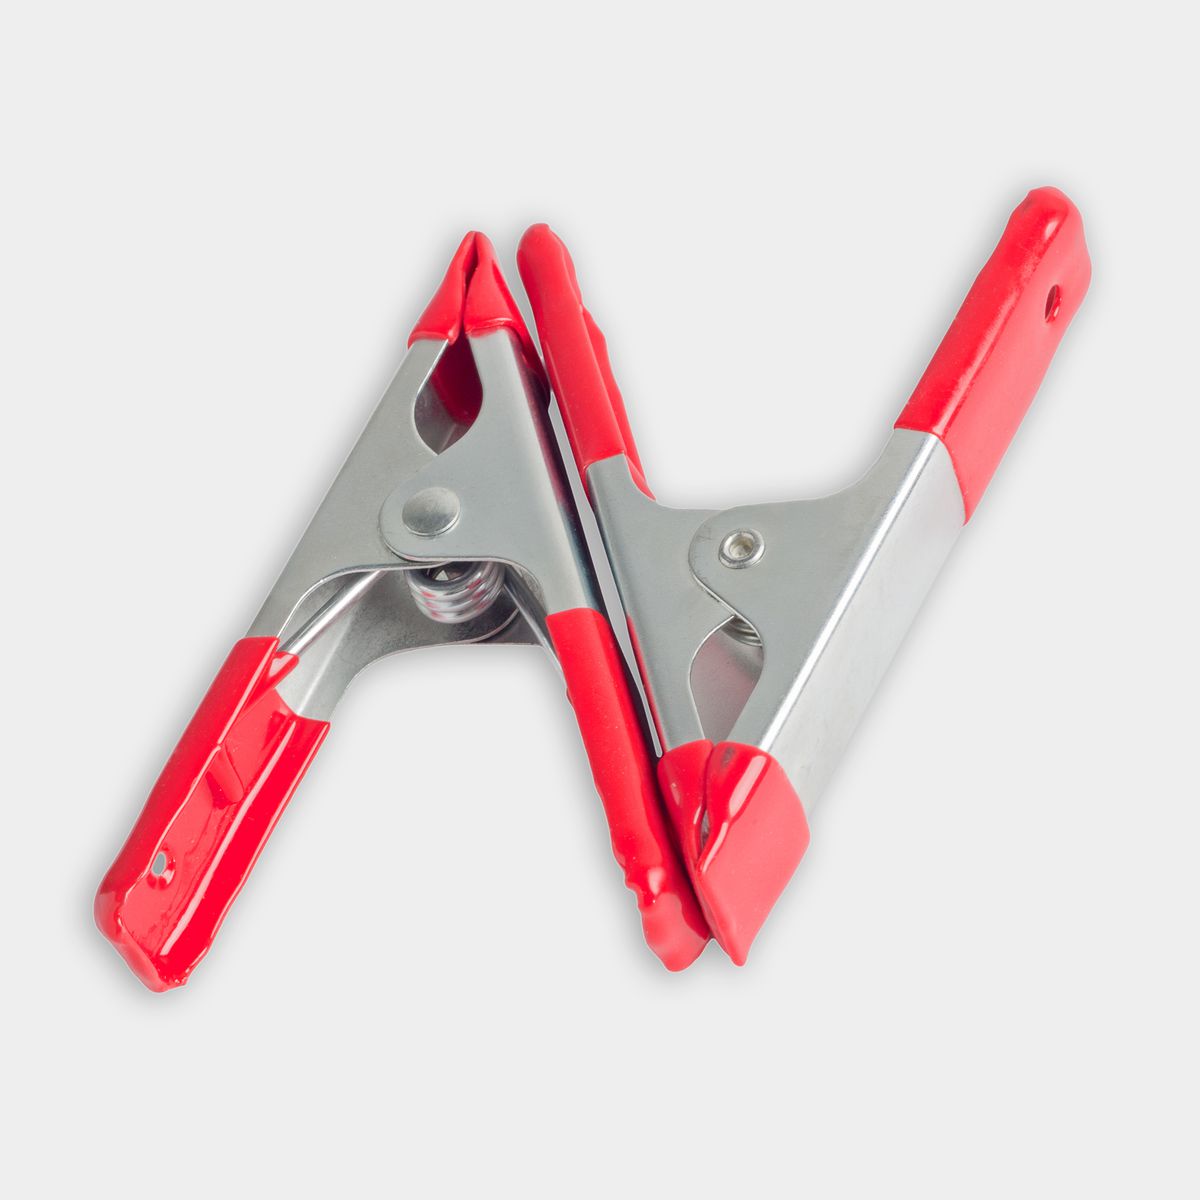 spring clamps on grey background